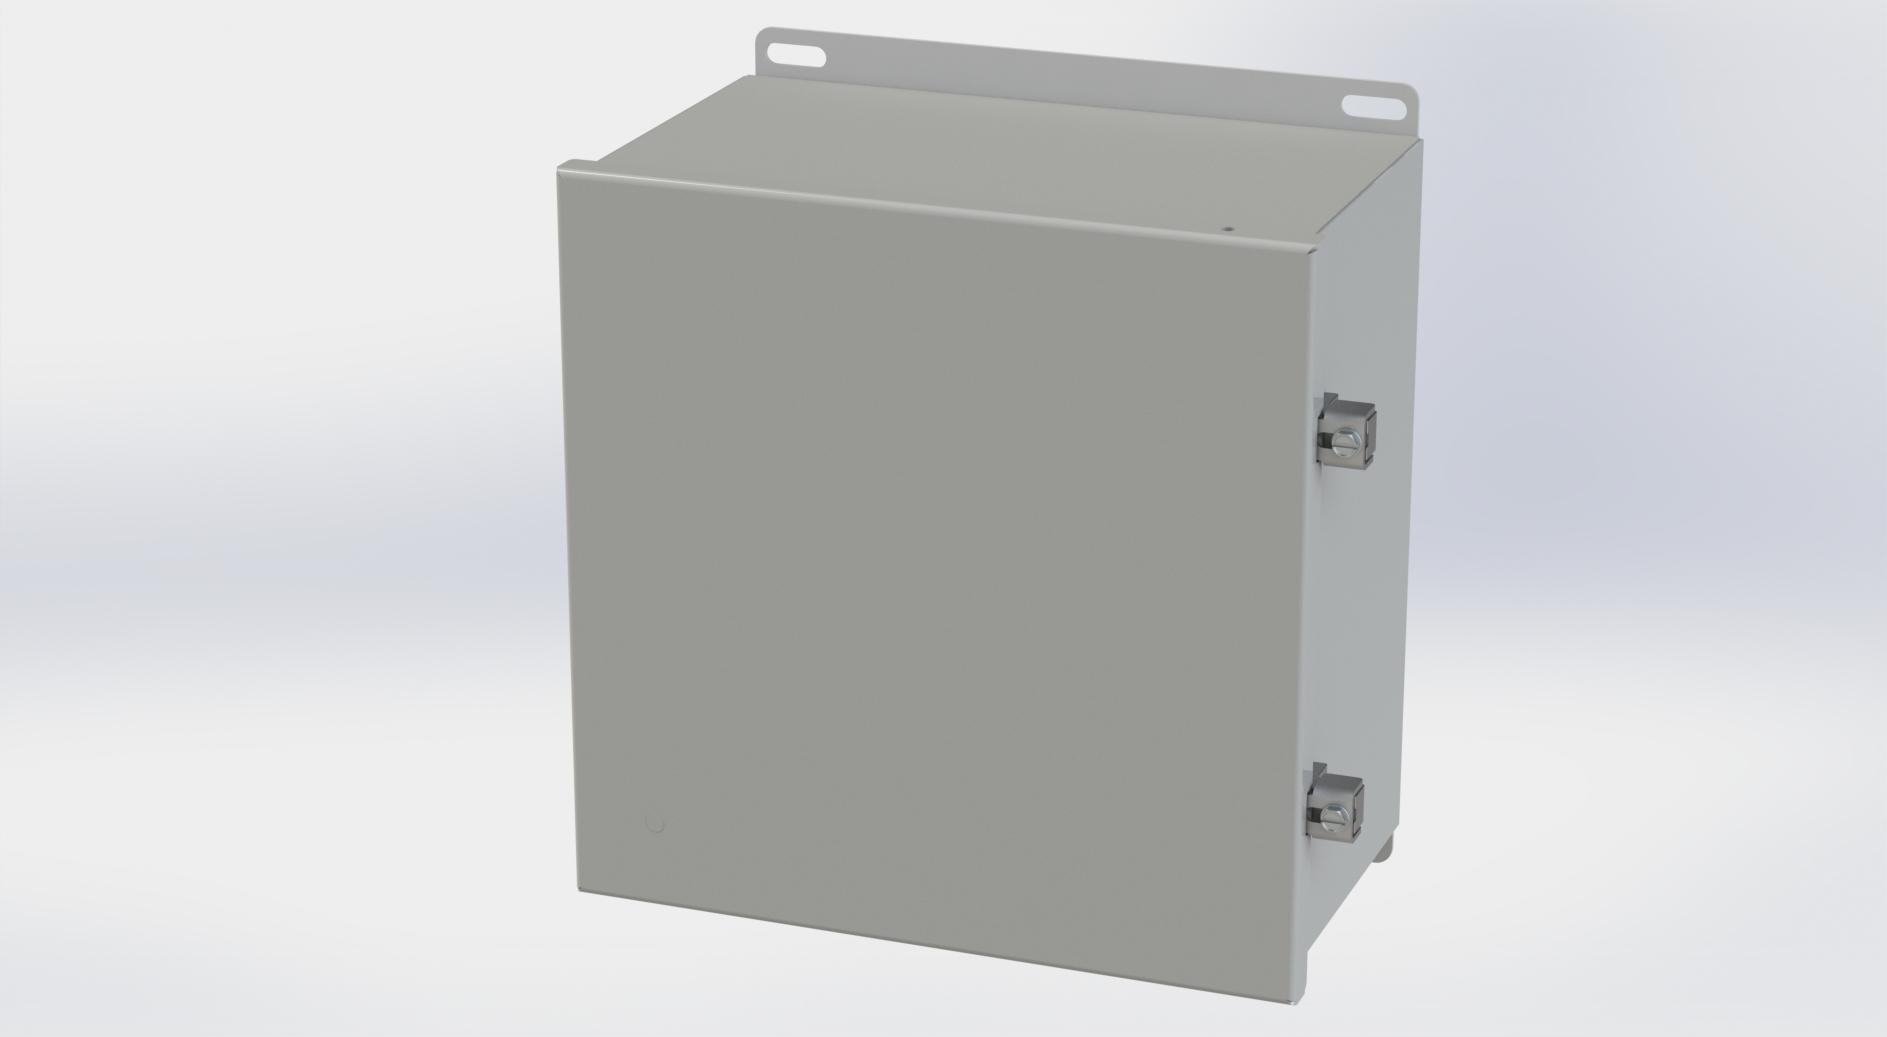 Saginaw Control SCE-10106CHNF CHNF Enclosure, Height:10.13", Width:10.00", Depth:6.00", ANSI-61 gray powder coating inside and out. Optional sub-panels are powder coated white.